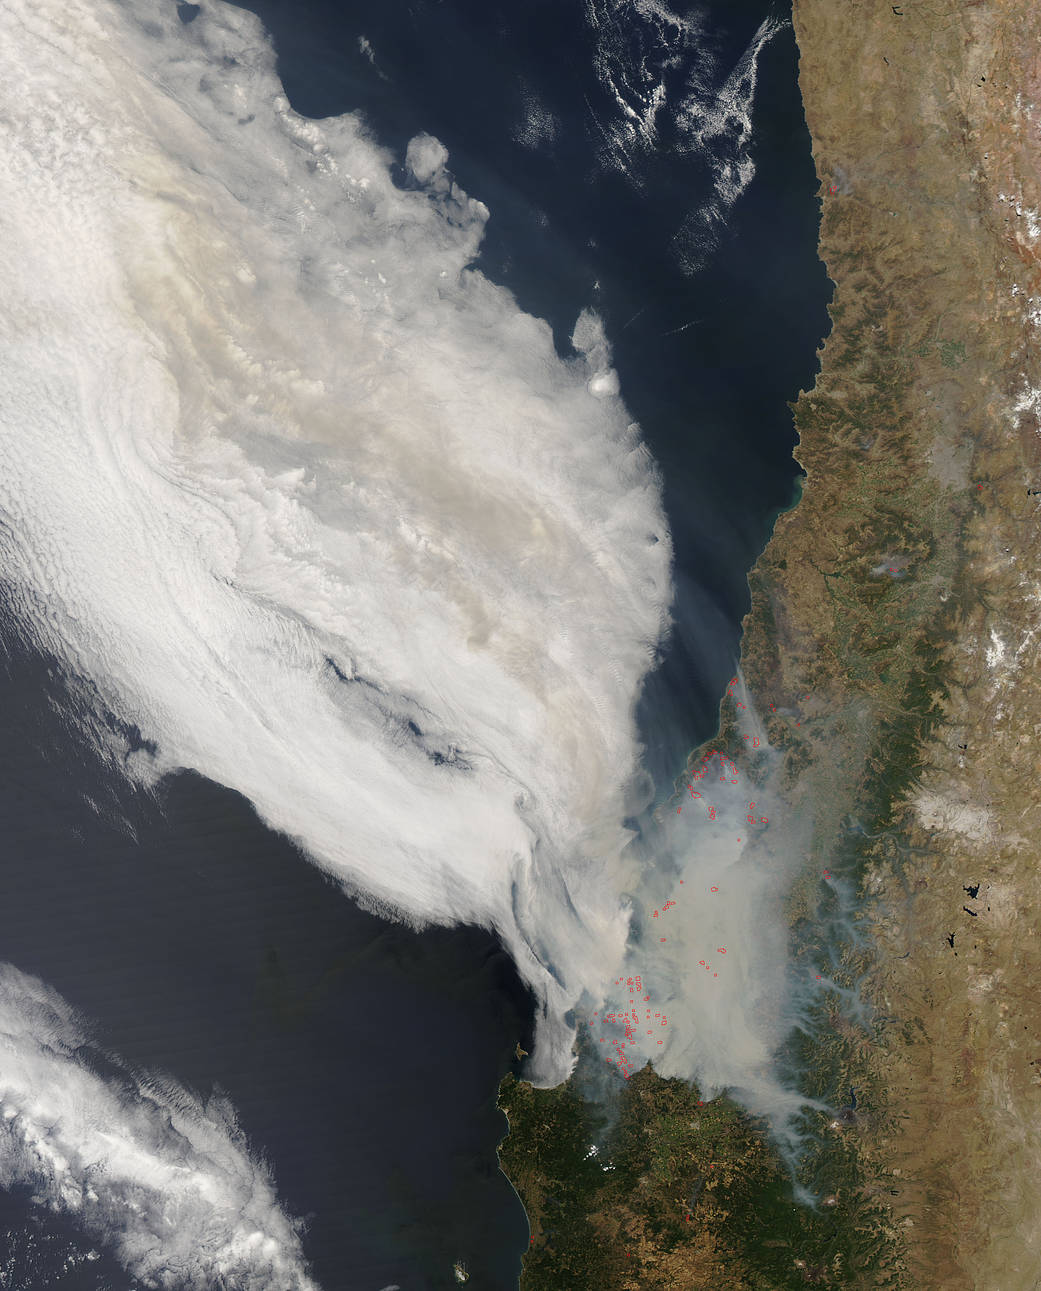 Fires and smoke in Central Chile